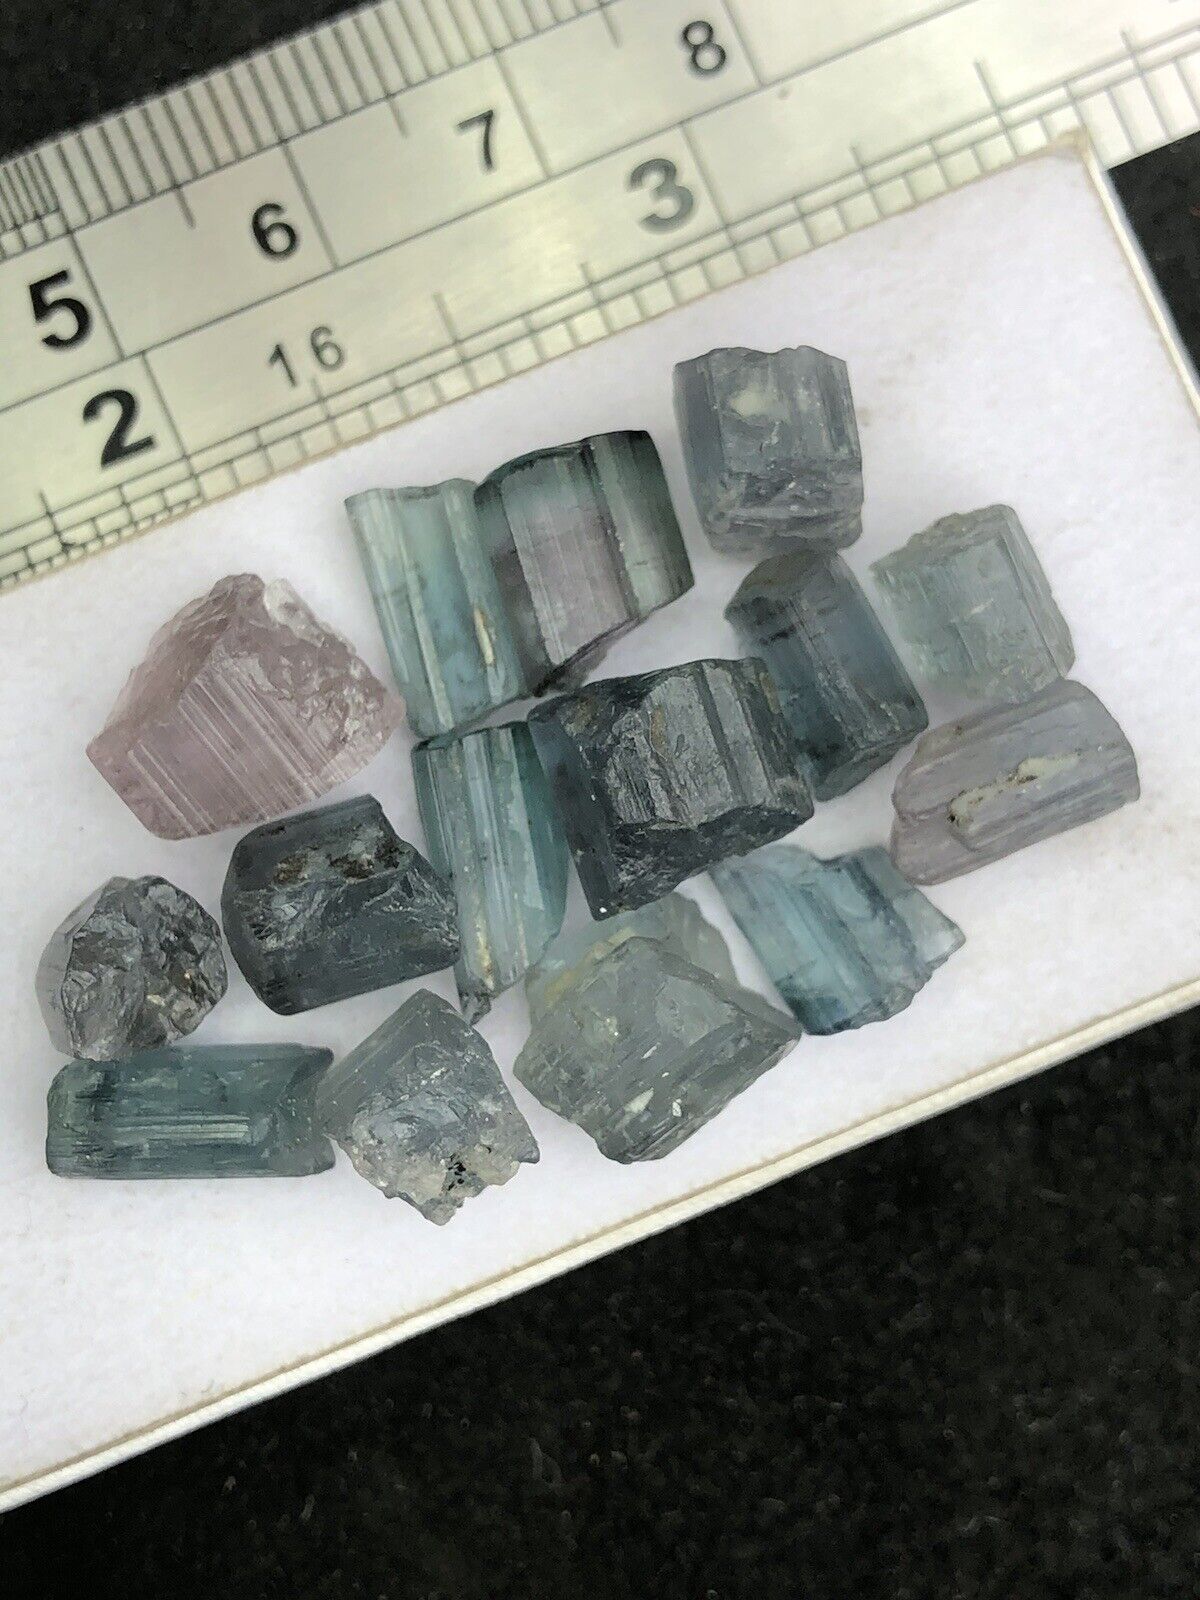 44 Carat Natural Tourmaline Crystal & Rough Facet Quality from Afghanistan